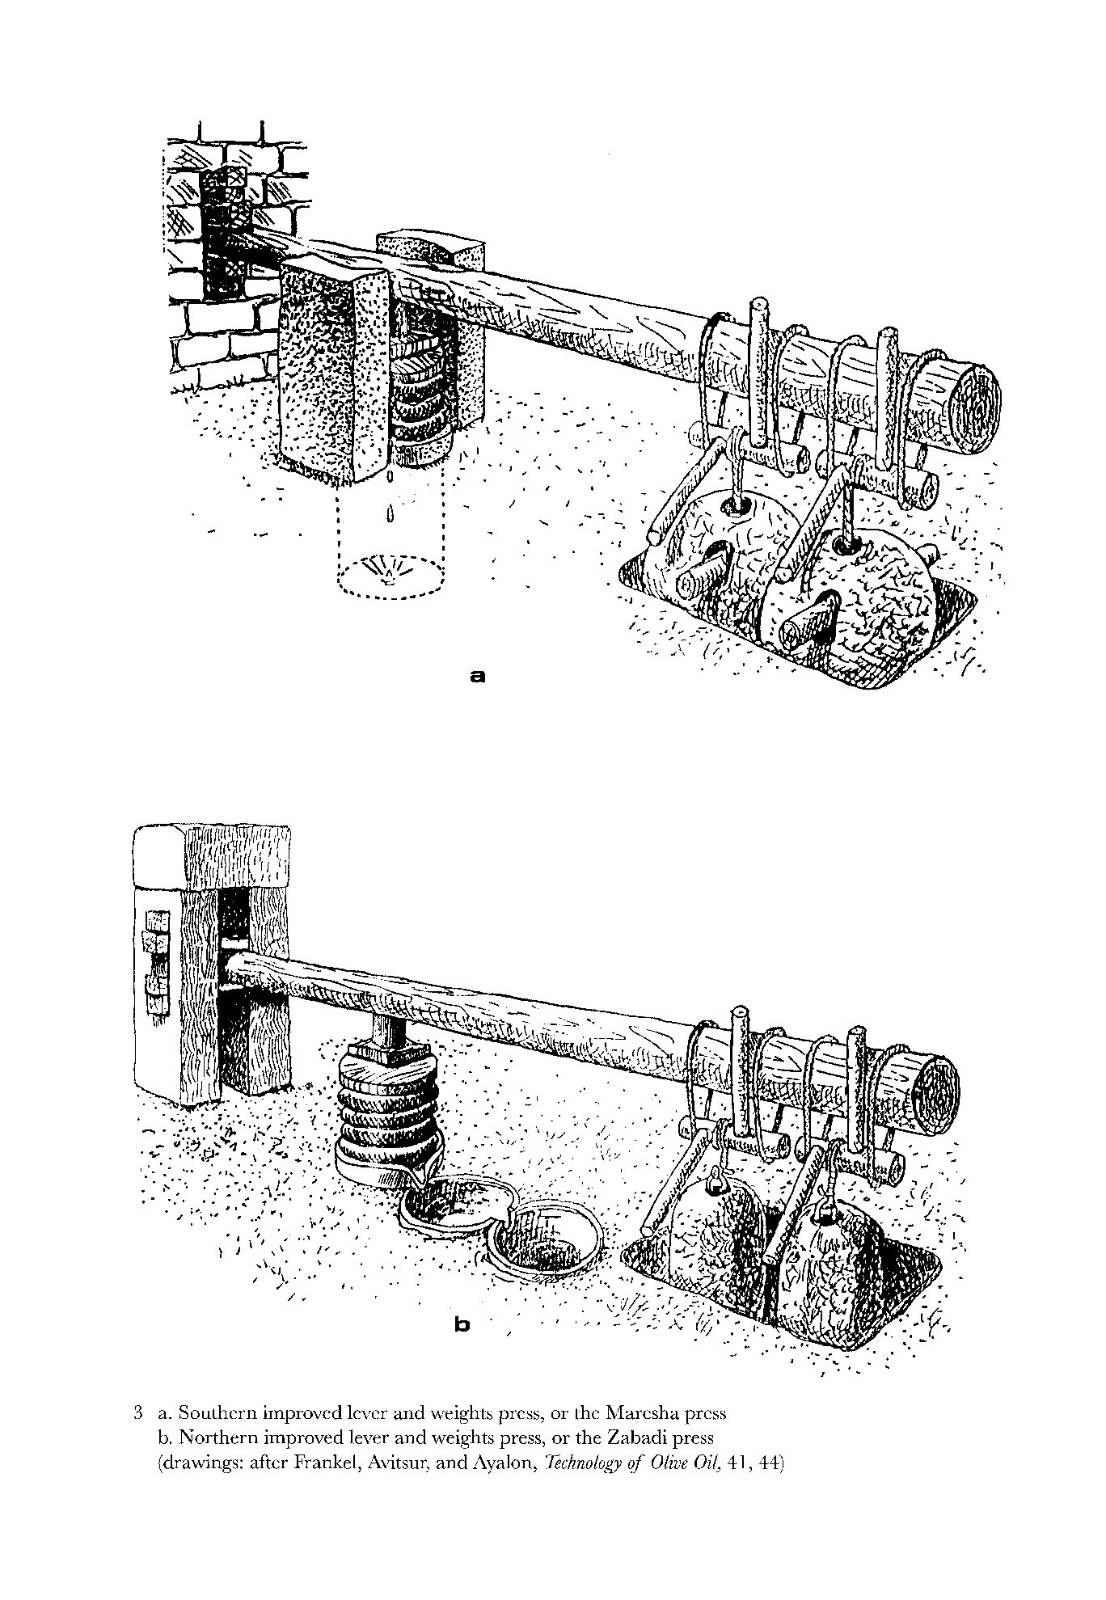 The press at Maresa. Drawing: Rafael Frankel, “Introduction” in Etan Ayalon, Rafael Frankel, Amos Kloner (eds.), Oil and Wine Presses in Israel from the Hellenistic, Roman and Byzantine Periods, BAR (2009), p. 16.